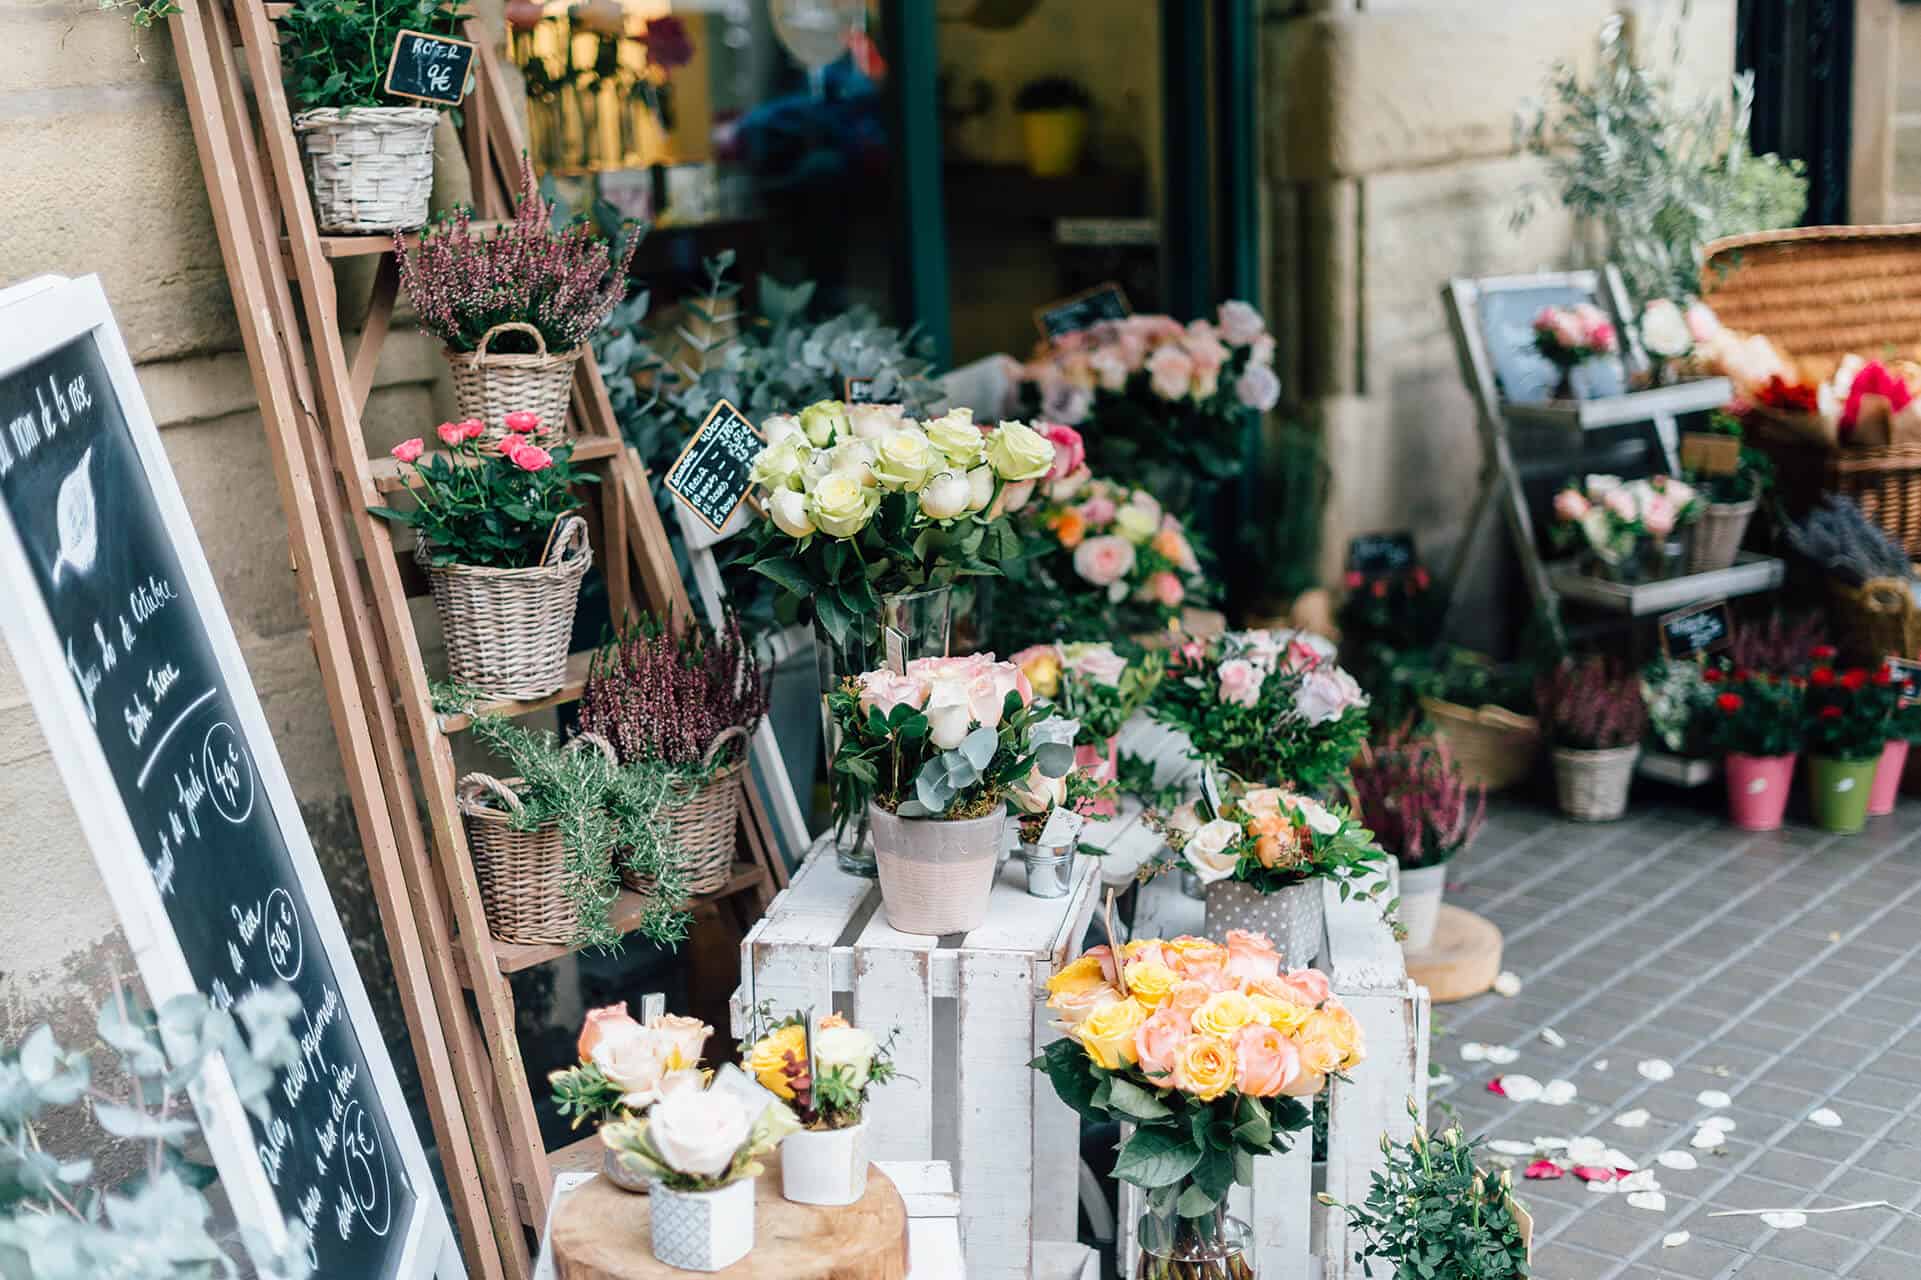 The front of a florist